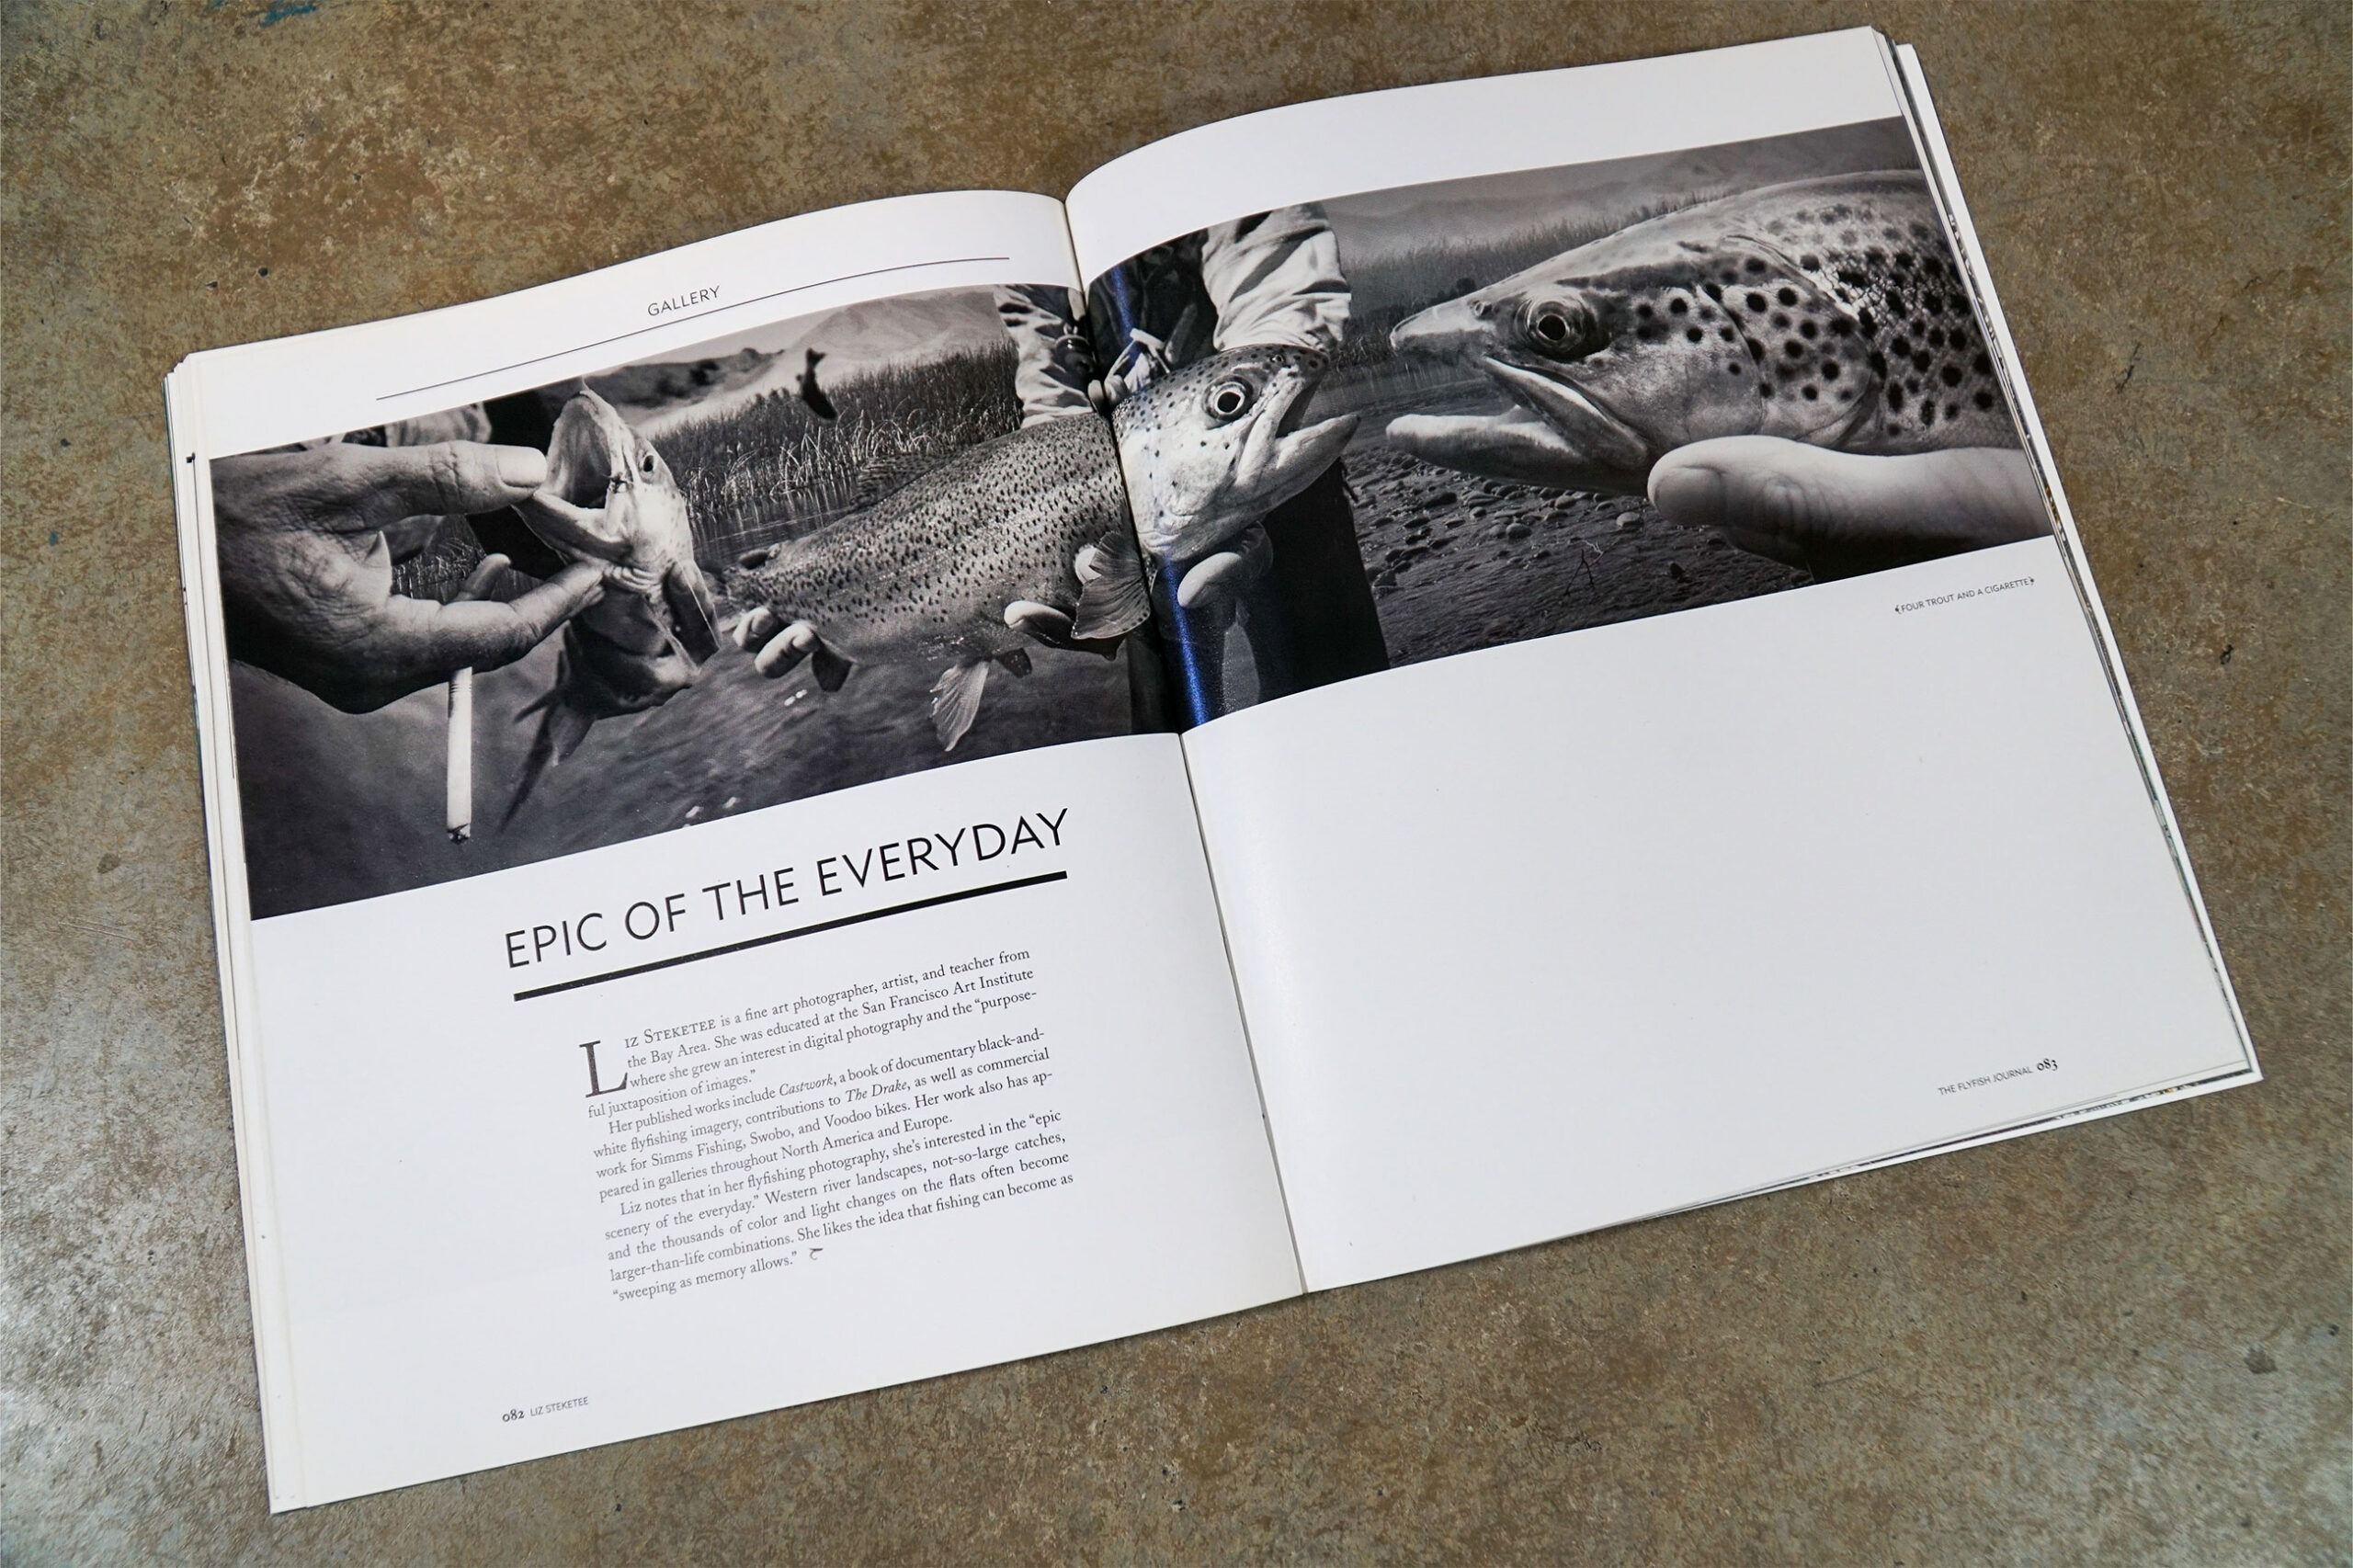 The Flyfish Journal Volume 1 Issue 1 Feature Epic of the Everyday